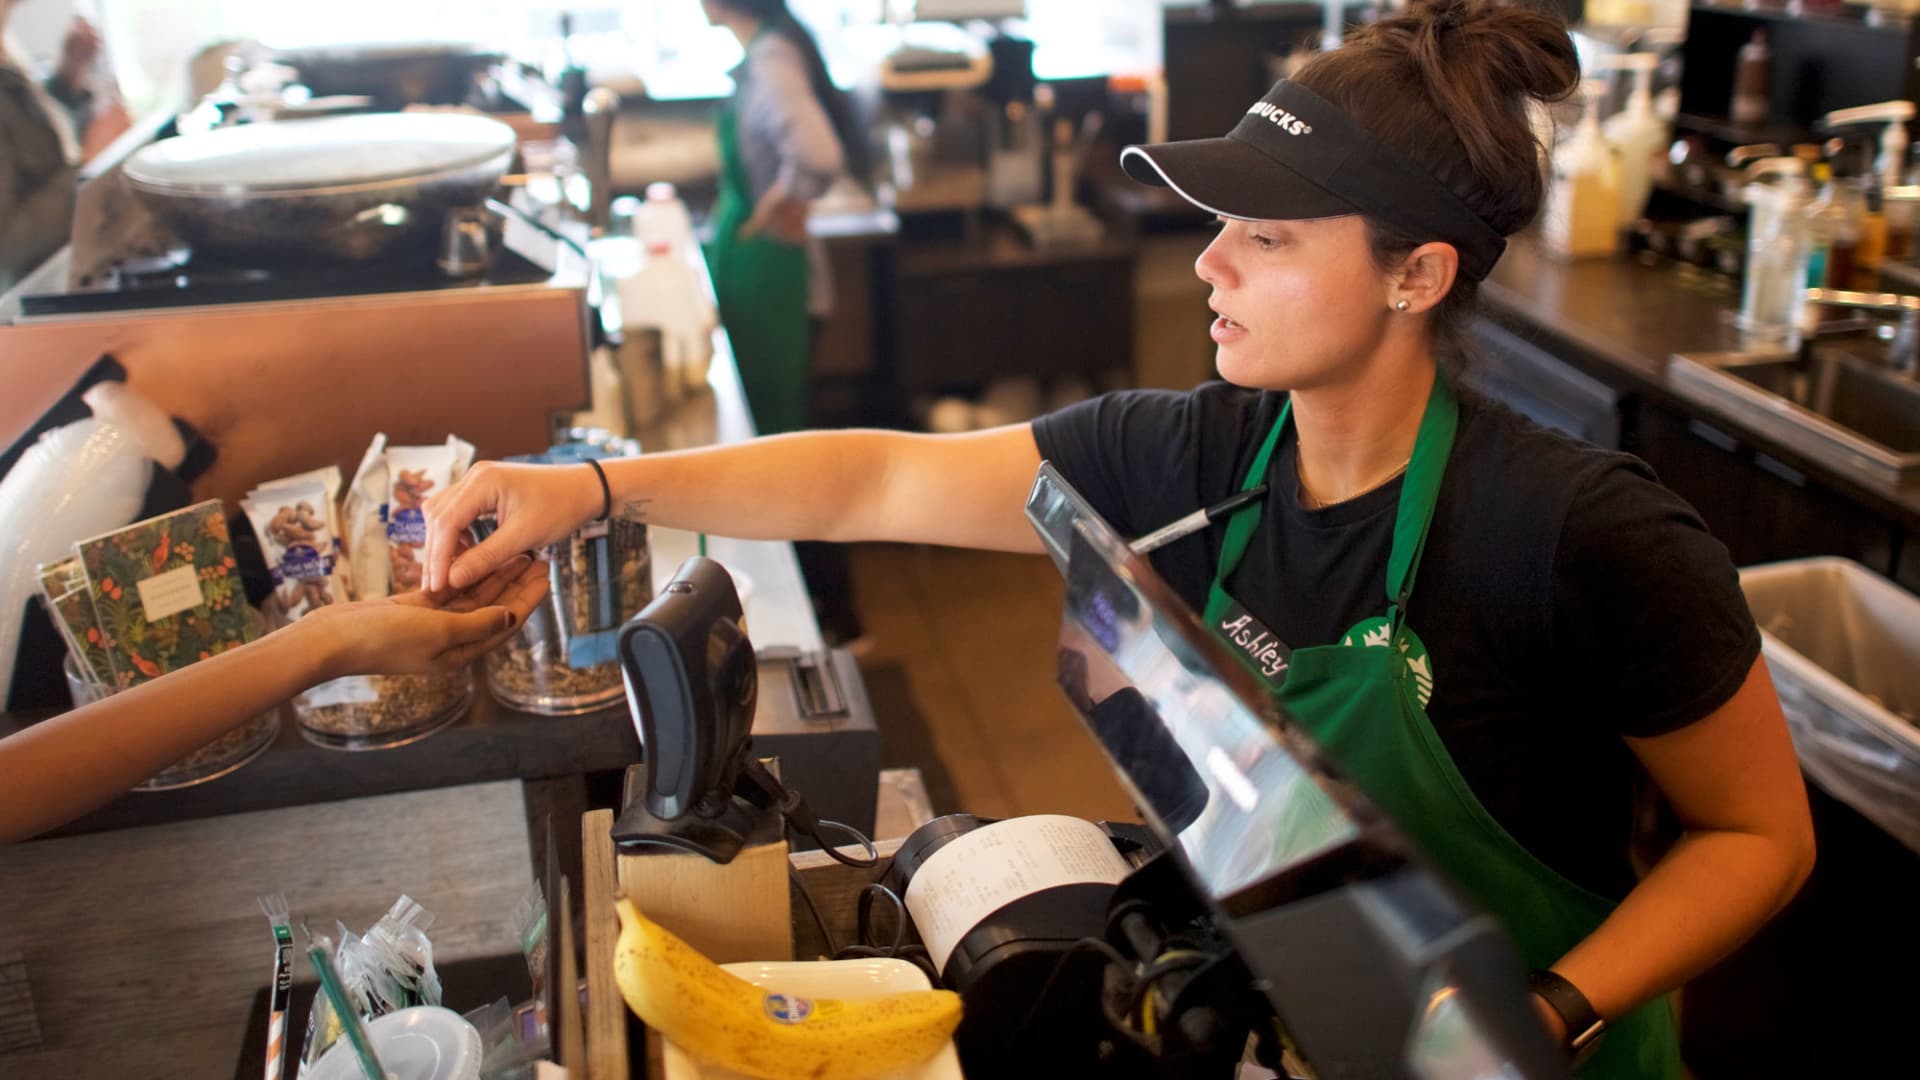 Starbucks to hike wages double training for workers as CEO Schultz tries to head off union push – CNBC